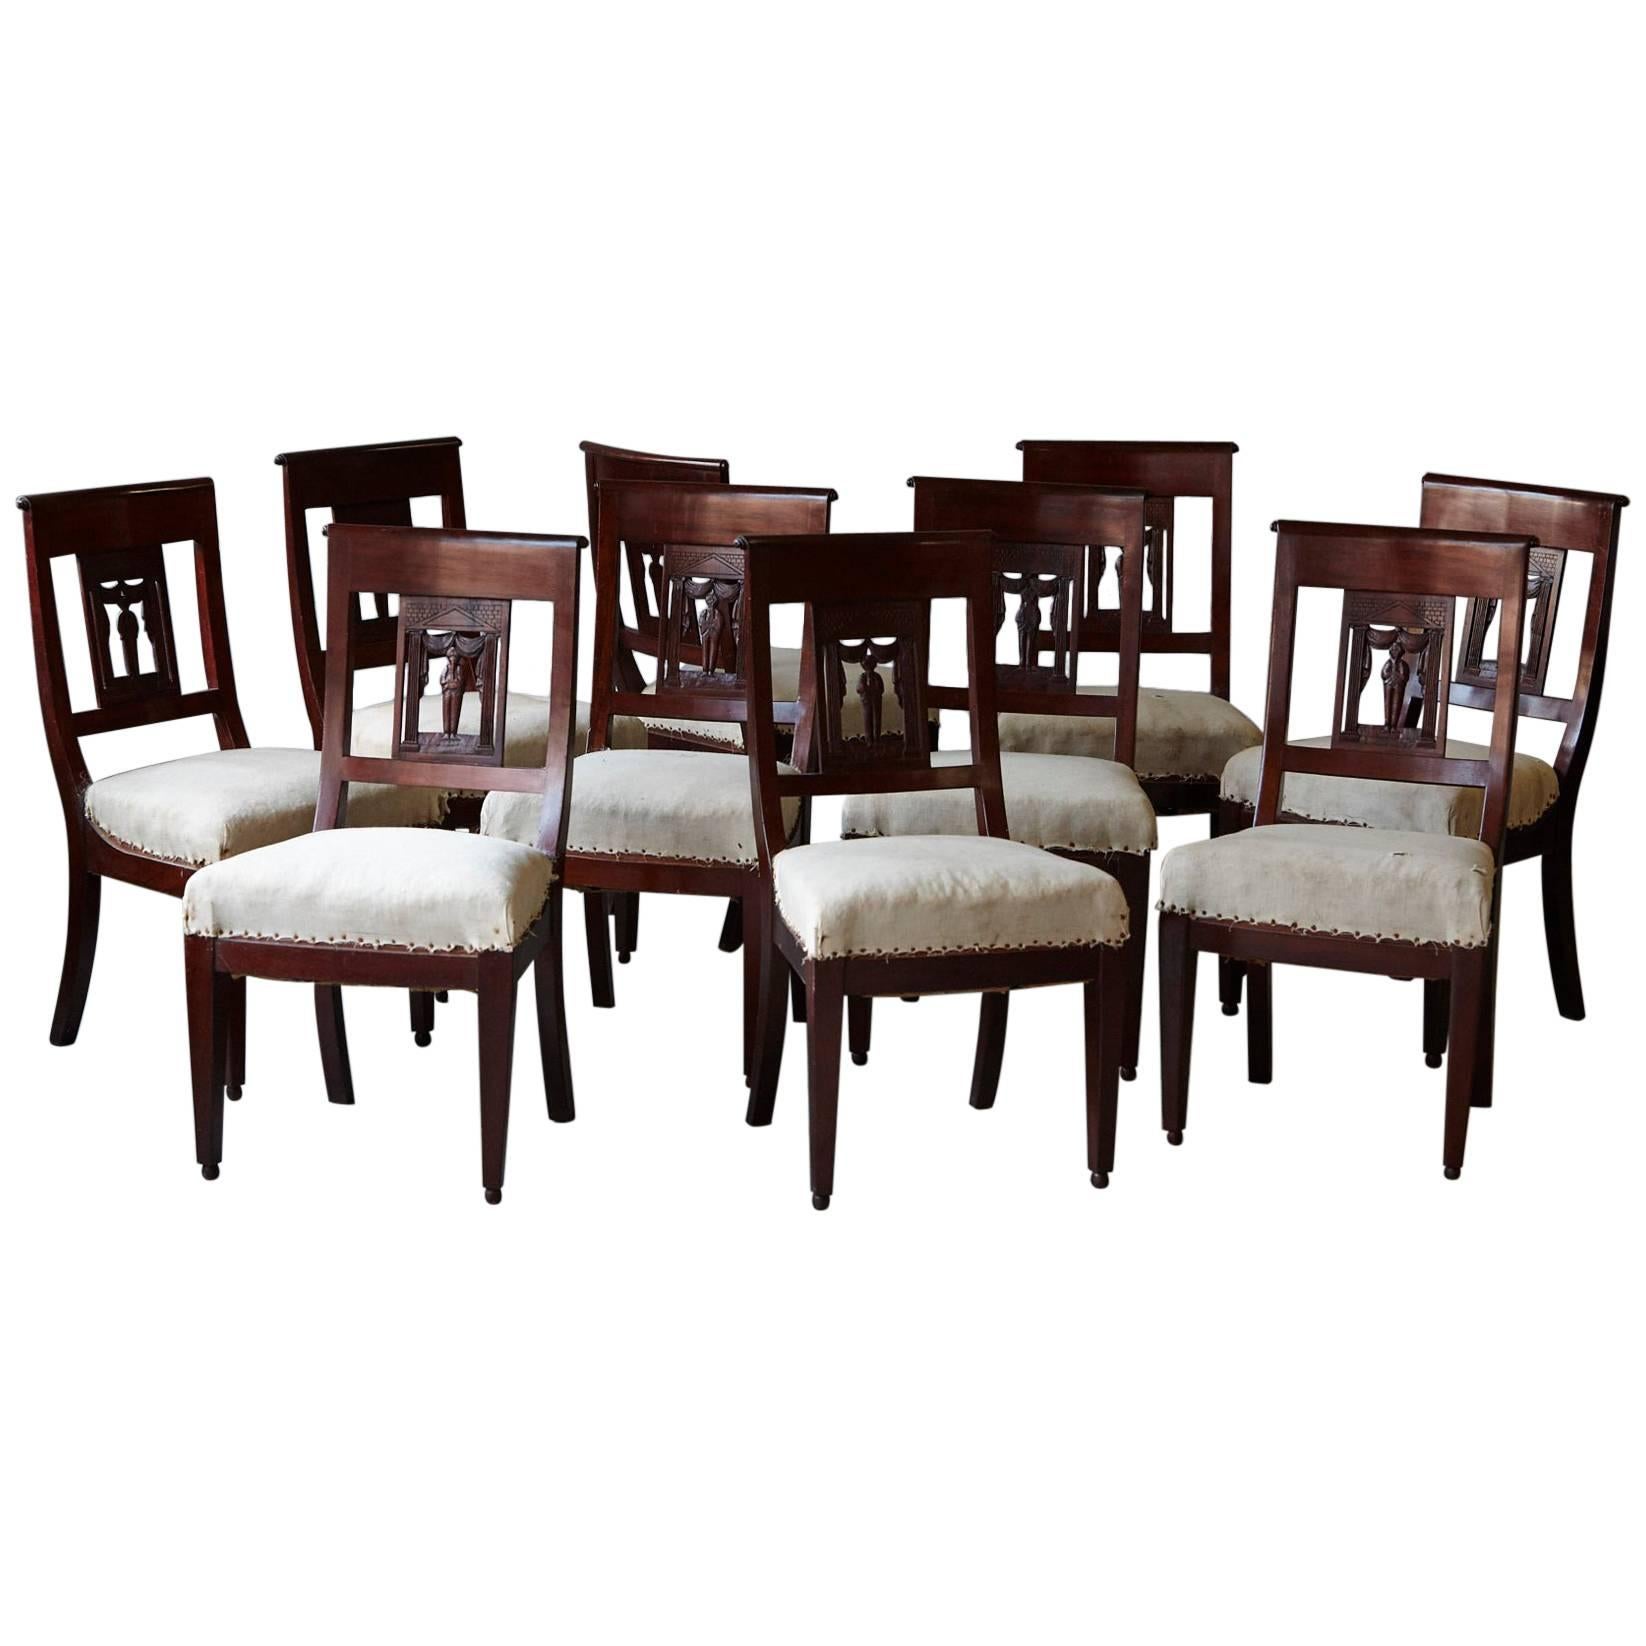 Set of Ten Antique Mahogany Dining Chairs with Detailed Back Carvings